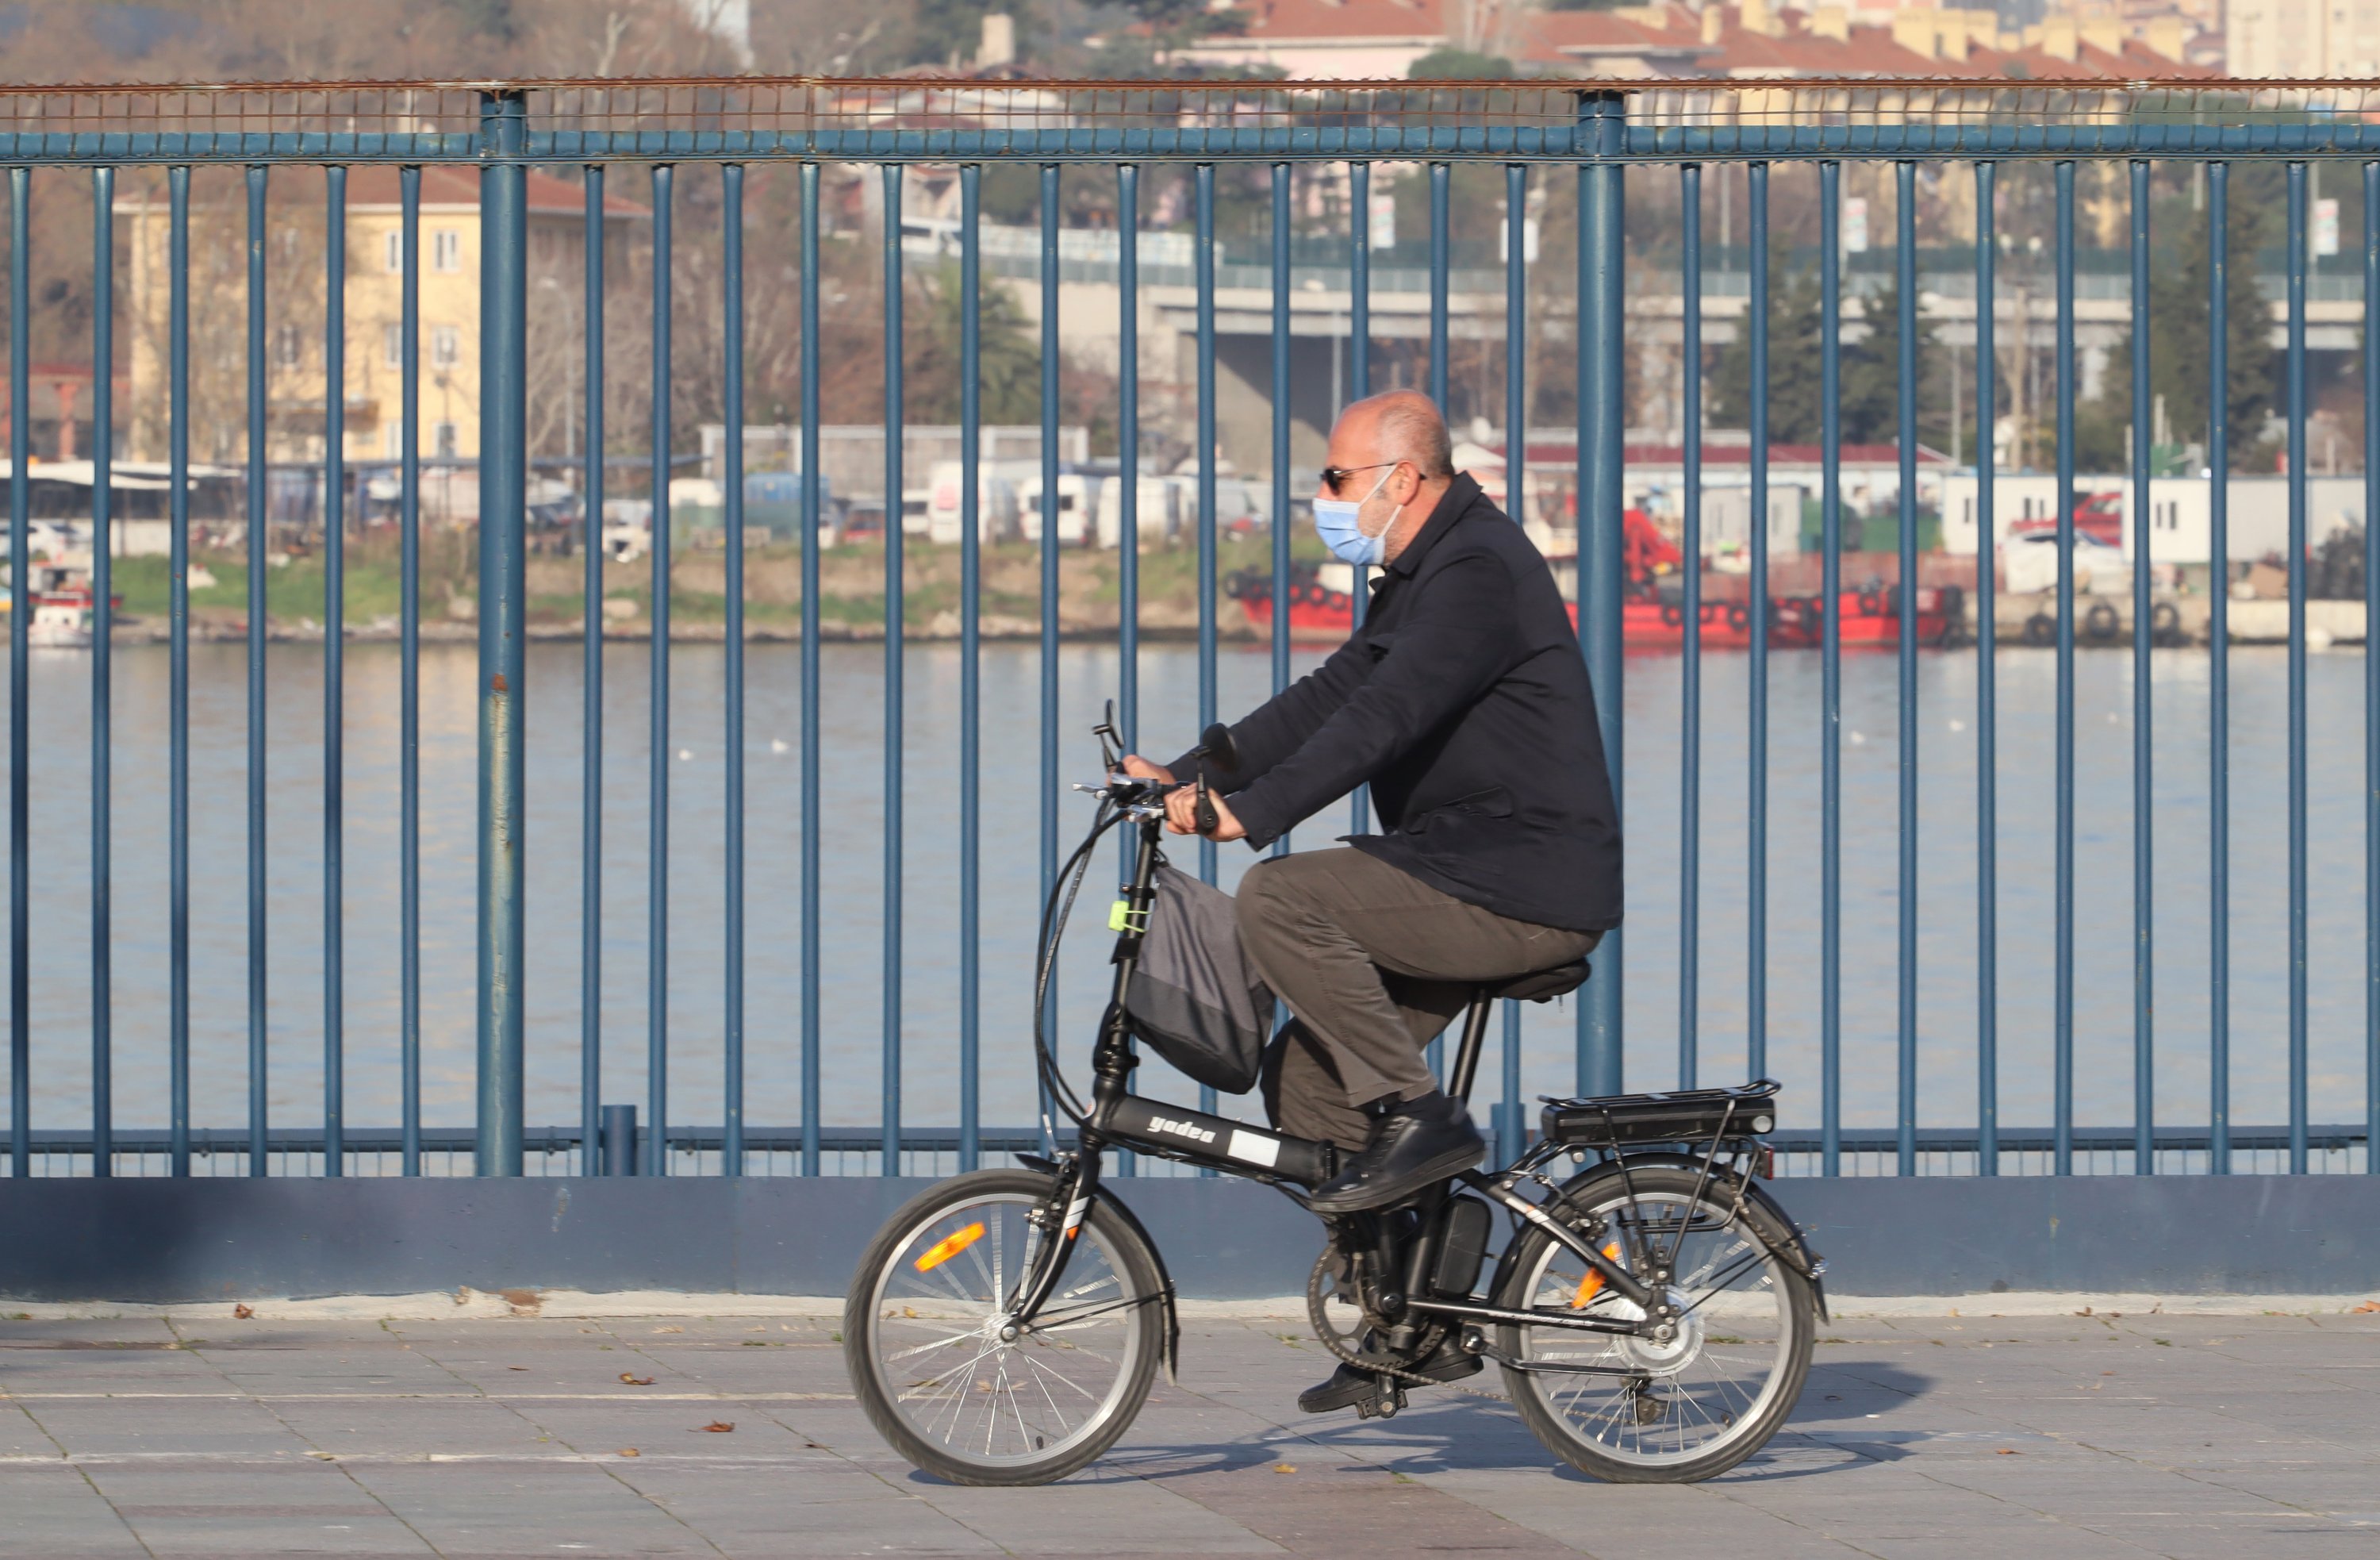 A man with a mask rides a bicycle on a sunny day in January in Kadikoy, Istanbul, Turkey, Jan. 2, 2021. (Shutterstock Photo)